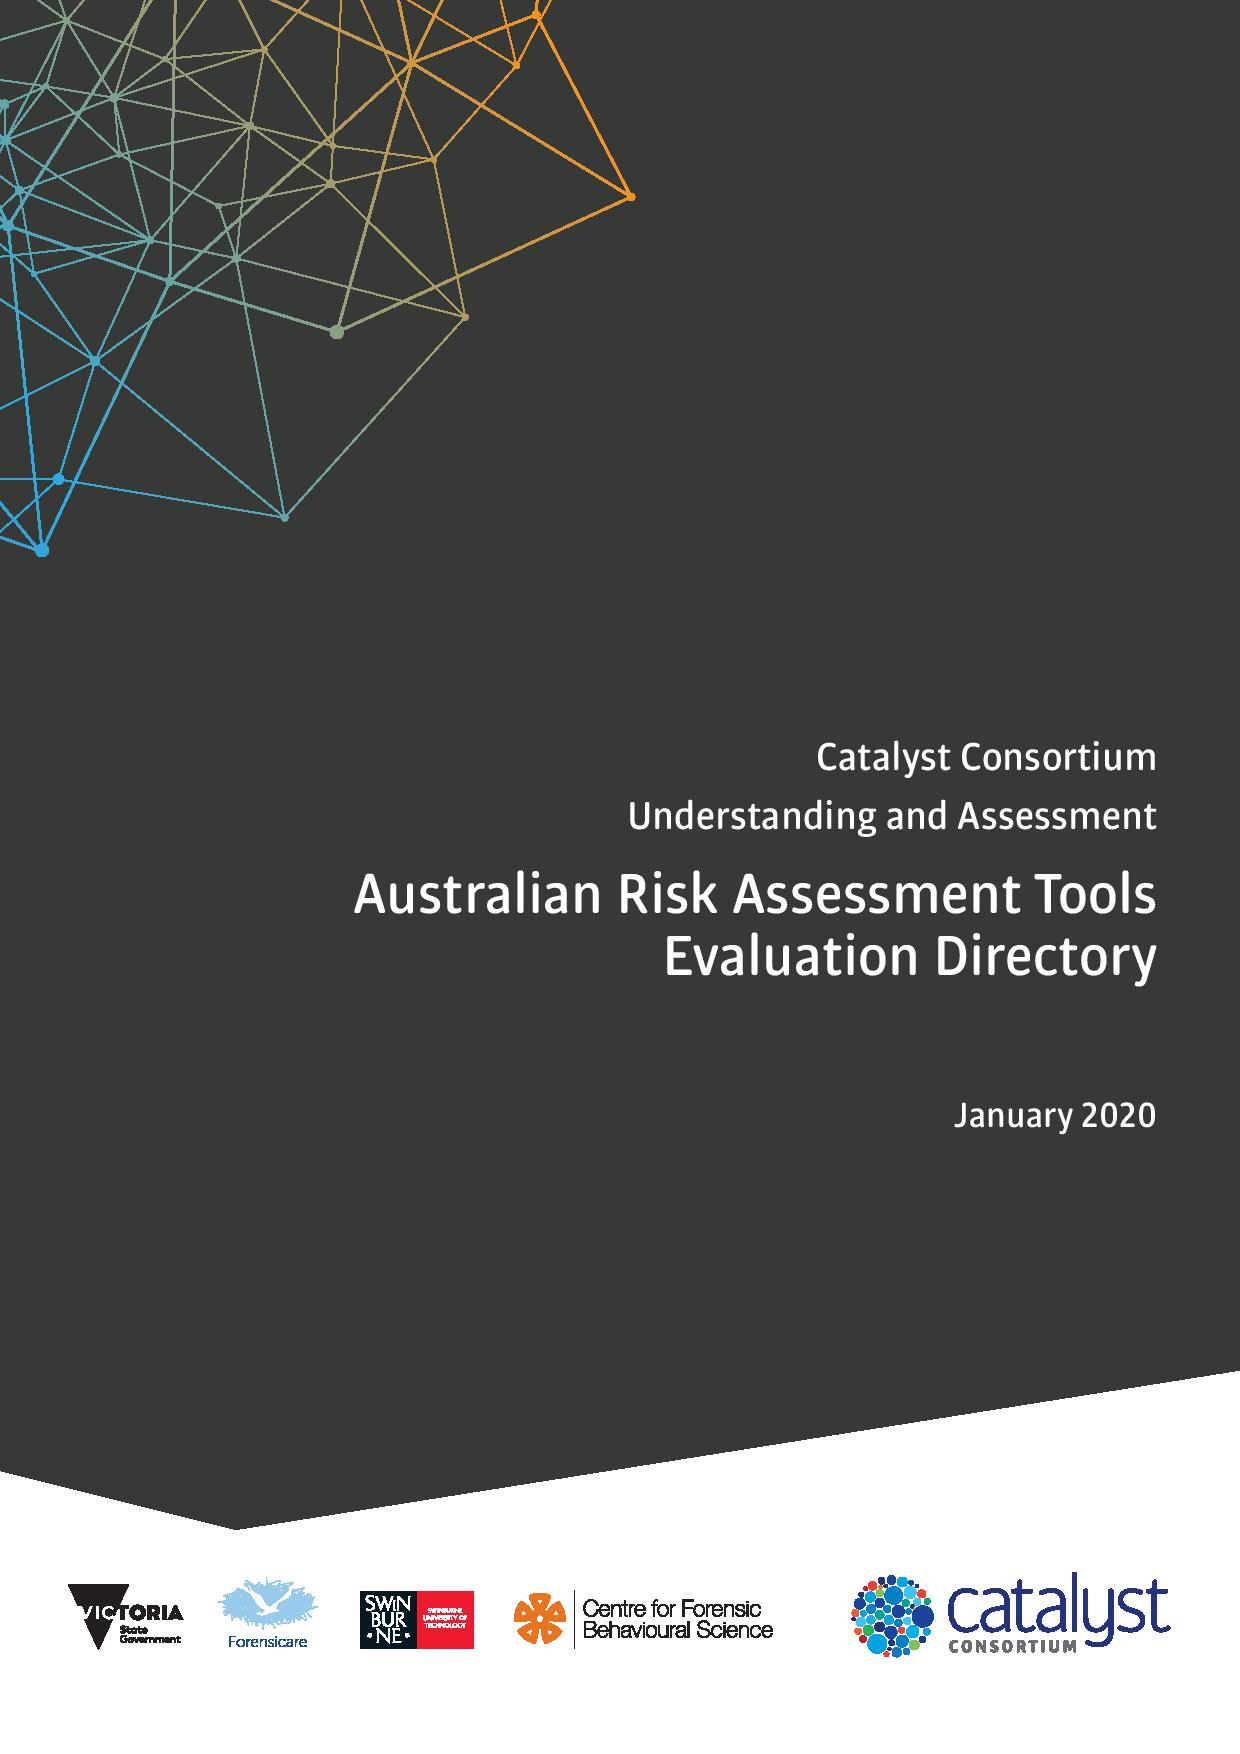 Australian Risk Assessment Tools Evaluation Directory (Aus-RATED)